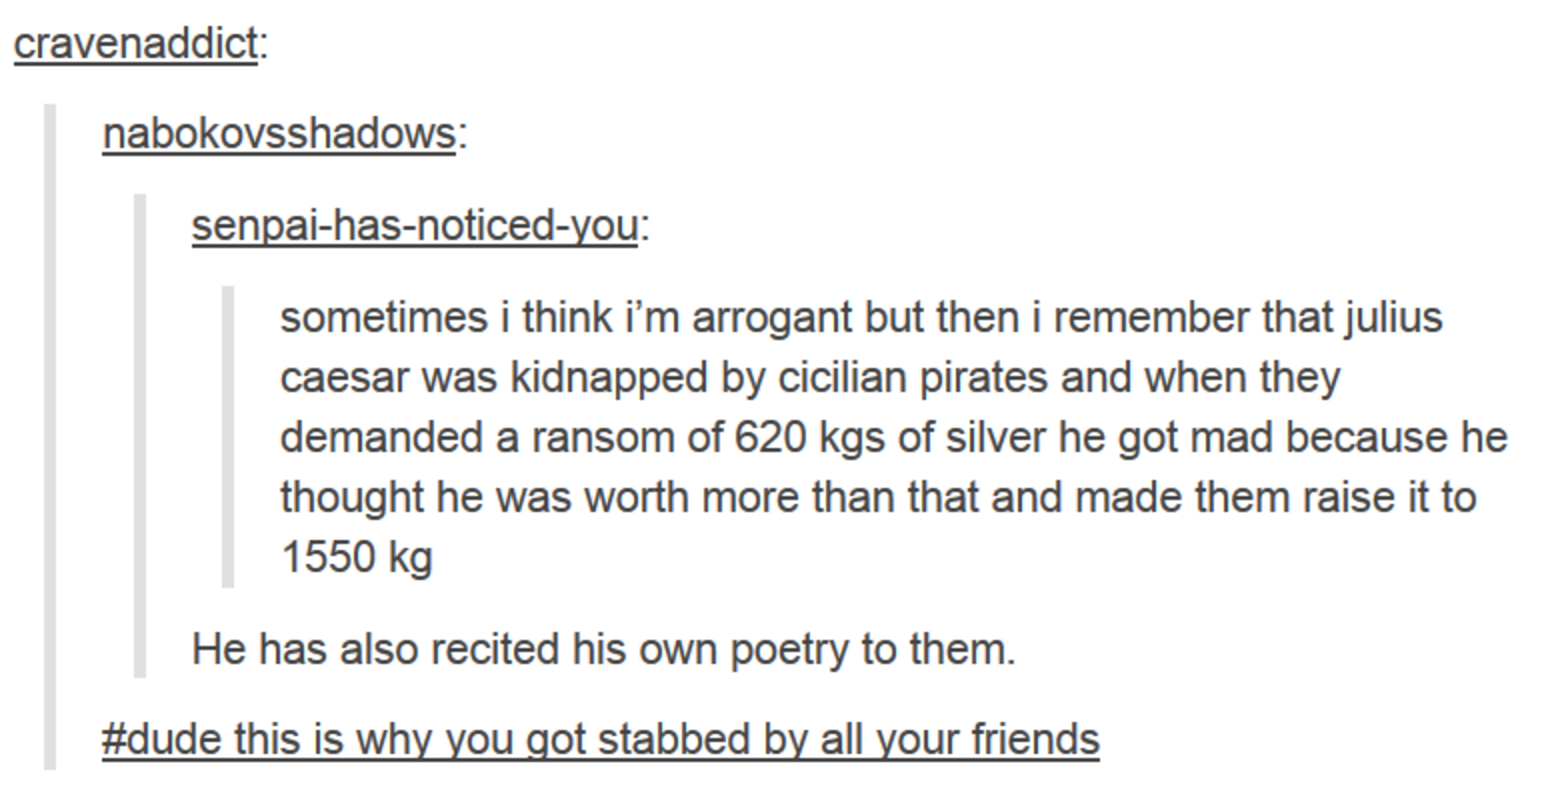 tumblr - julius caesar tumblr post - cravenaddict nabokovsshadows senpaihasnoticedyou sometimes i think i'm arrogant but then i remember that julius caesar was kidnapped by cicilian pirates and when they demanded a ransom of 620 kgs of silver he got mad b